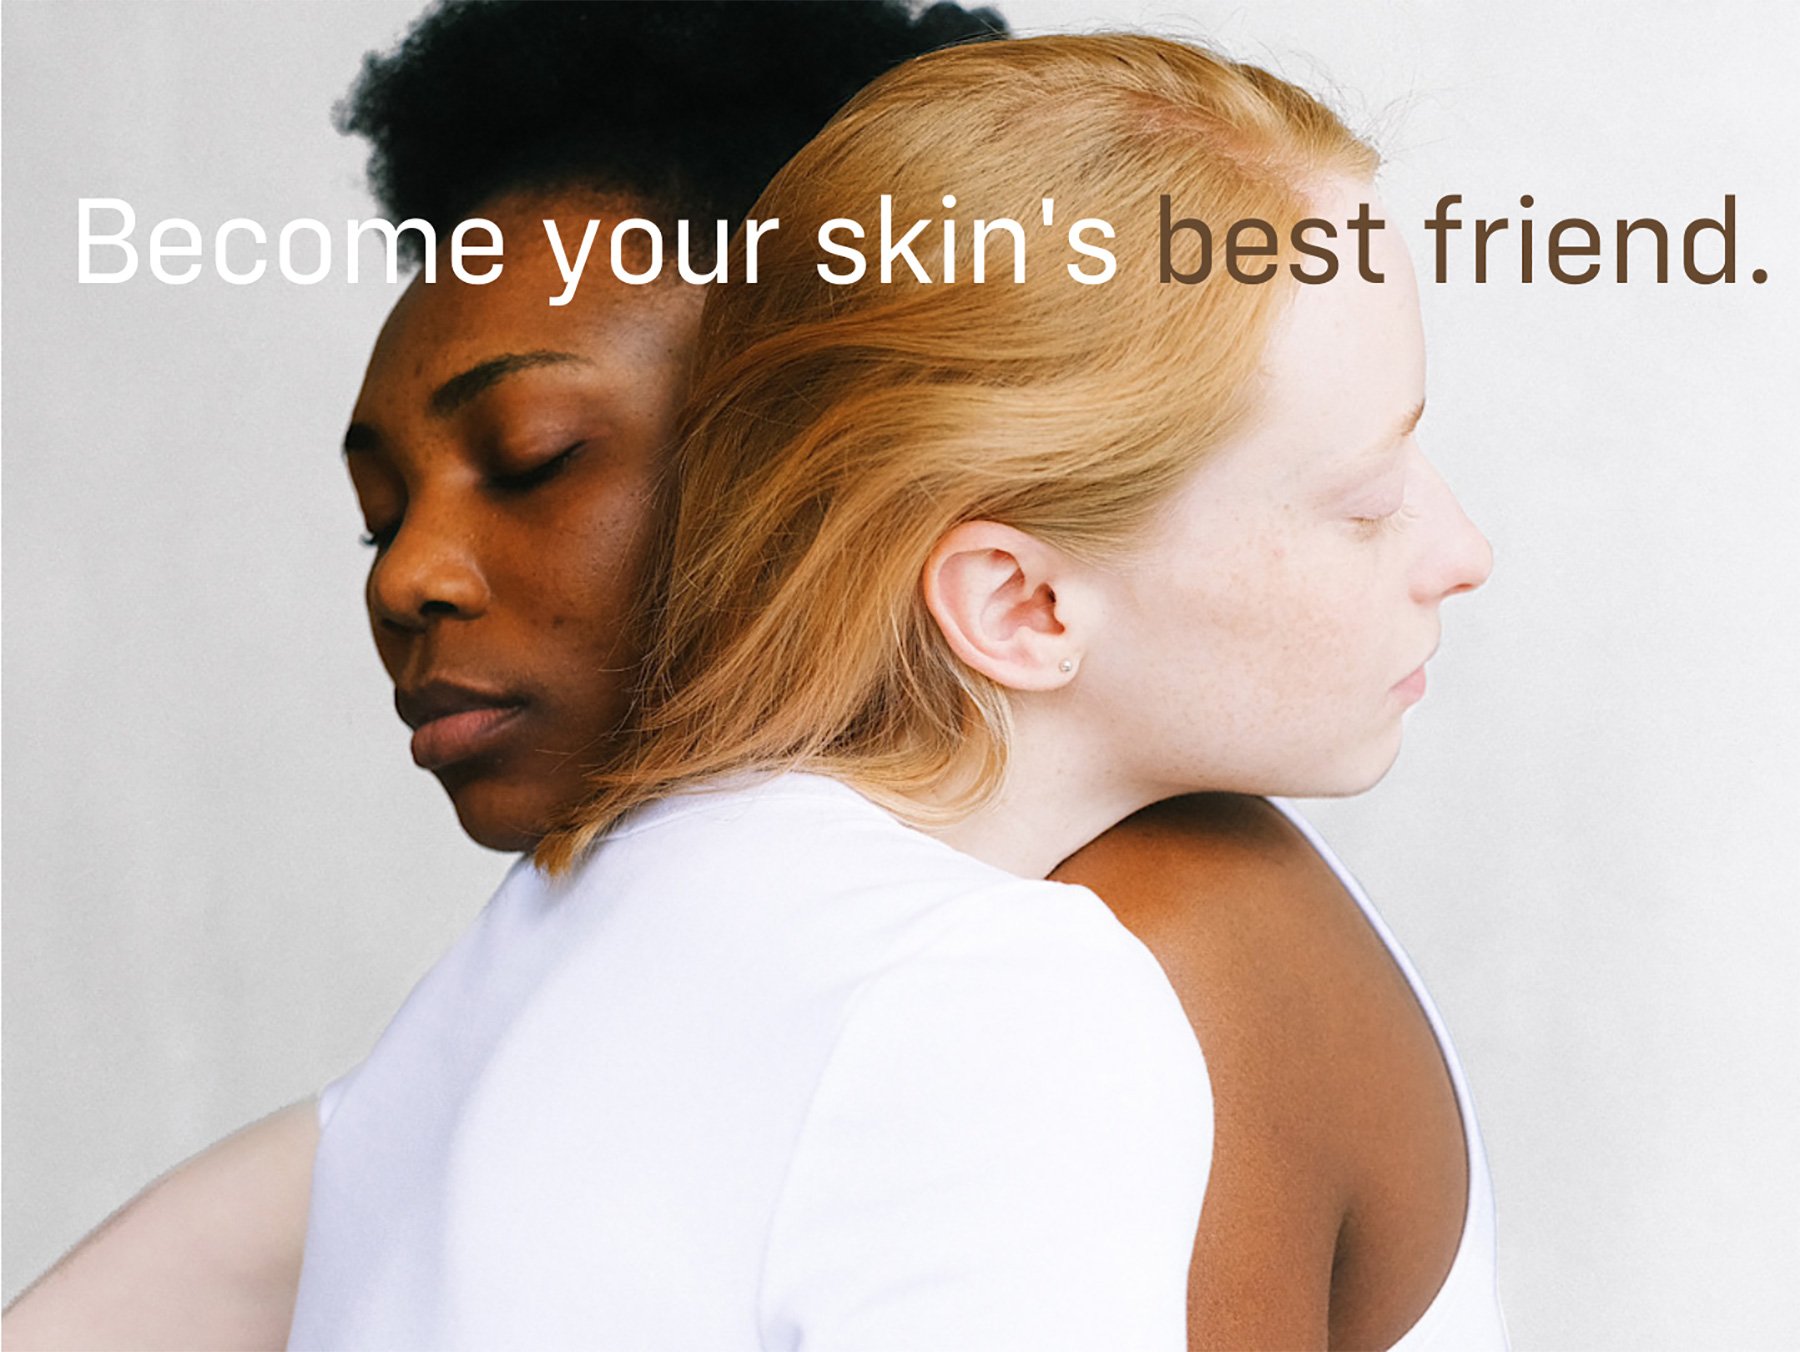 become your skin's best friend